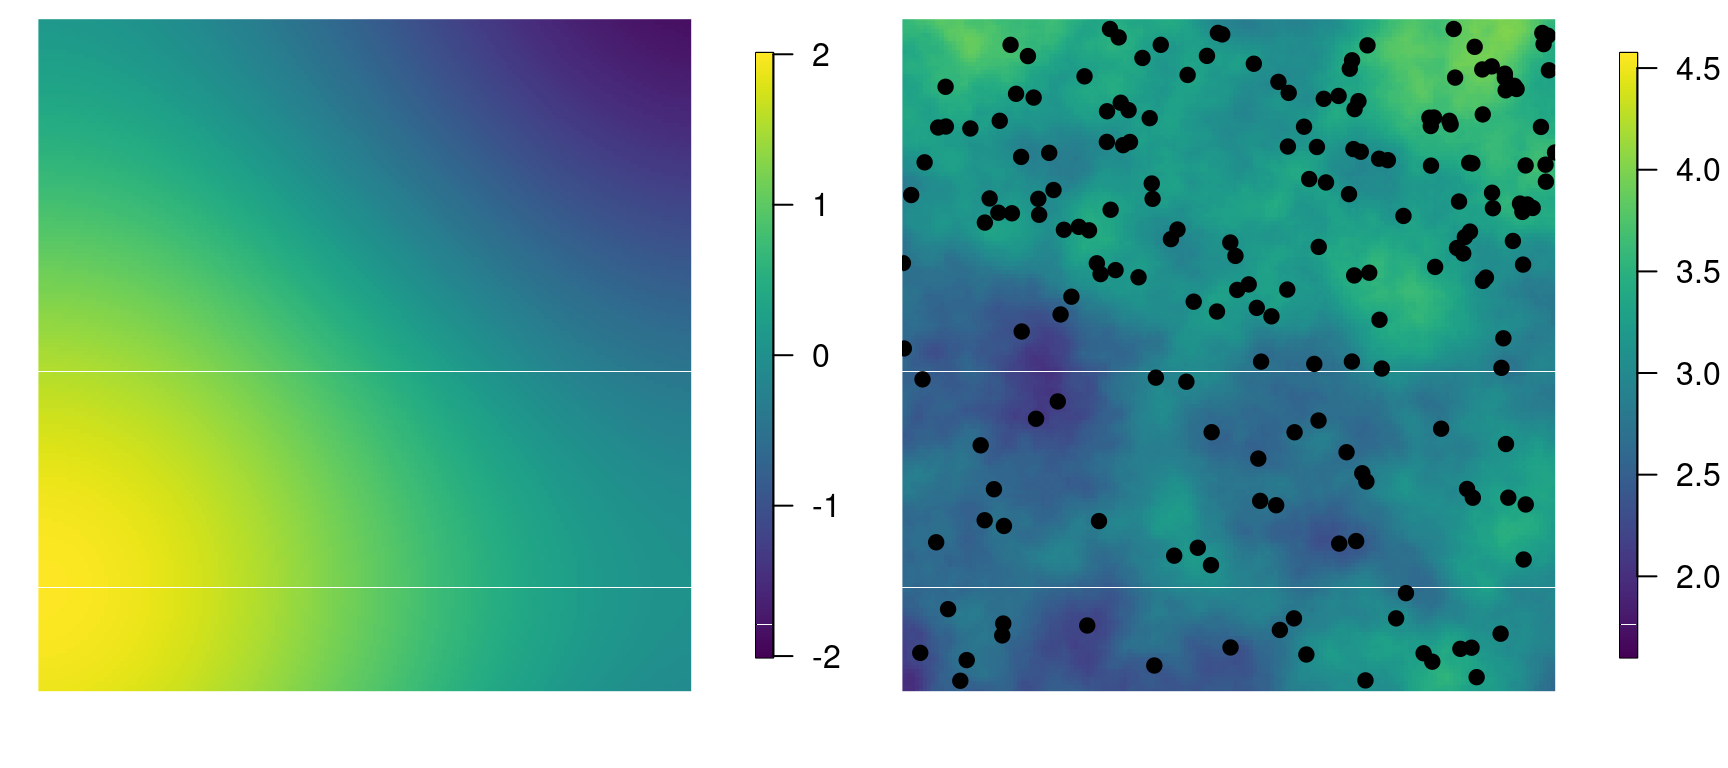 Simulated covariate (left) and simulated log-intensity of the point process, along with the simulated point pattern (right).